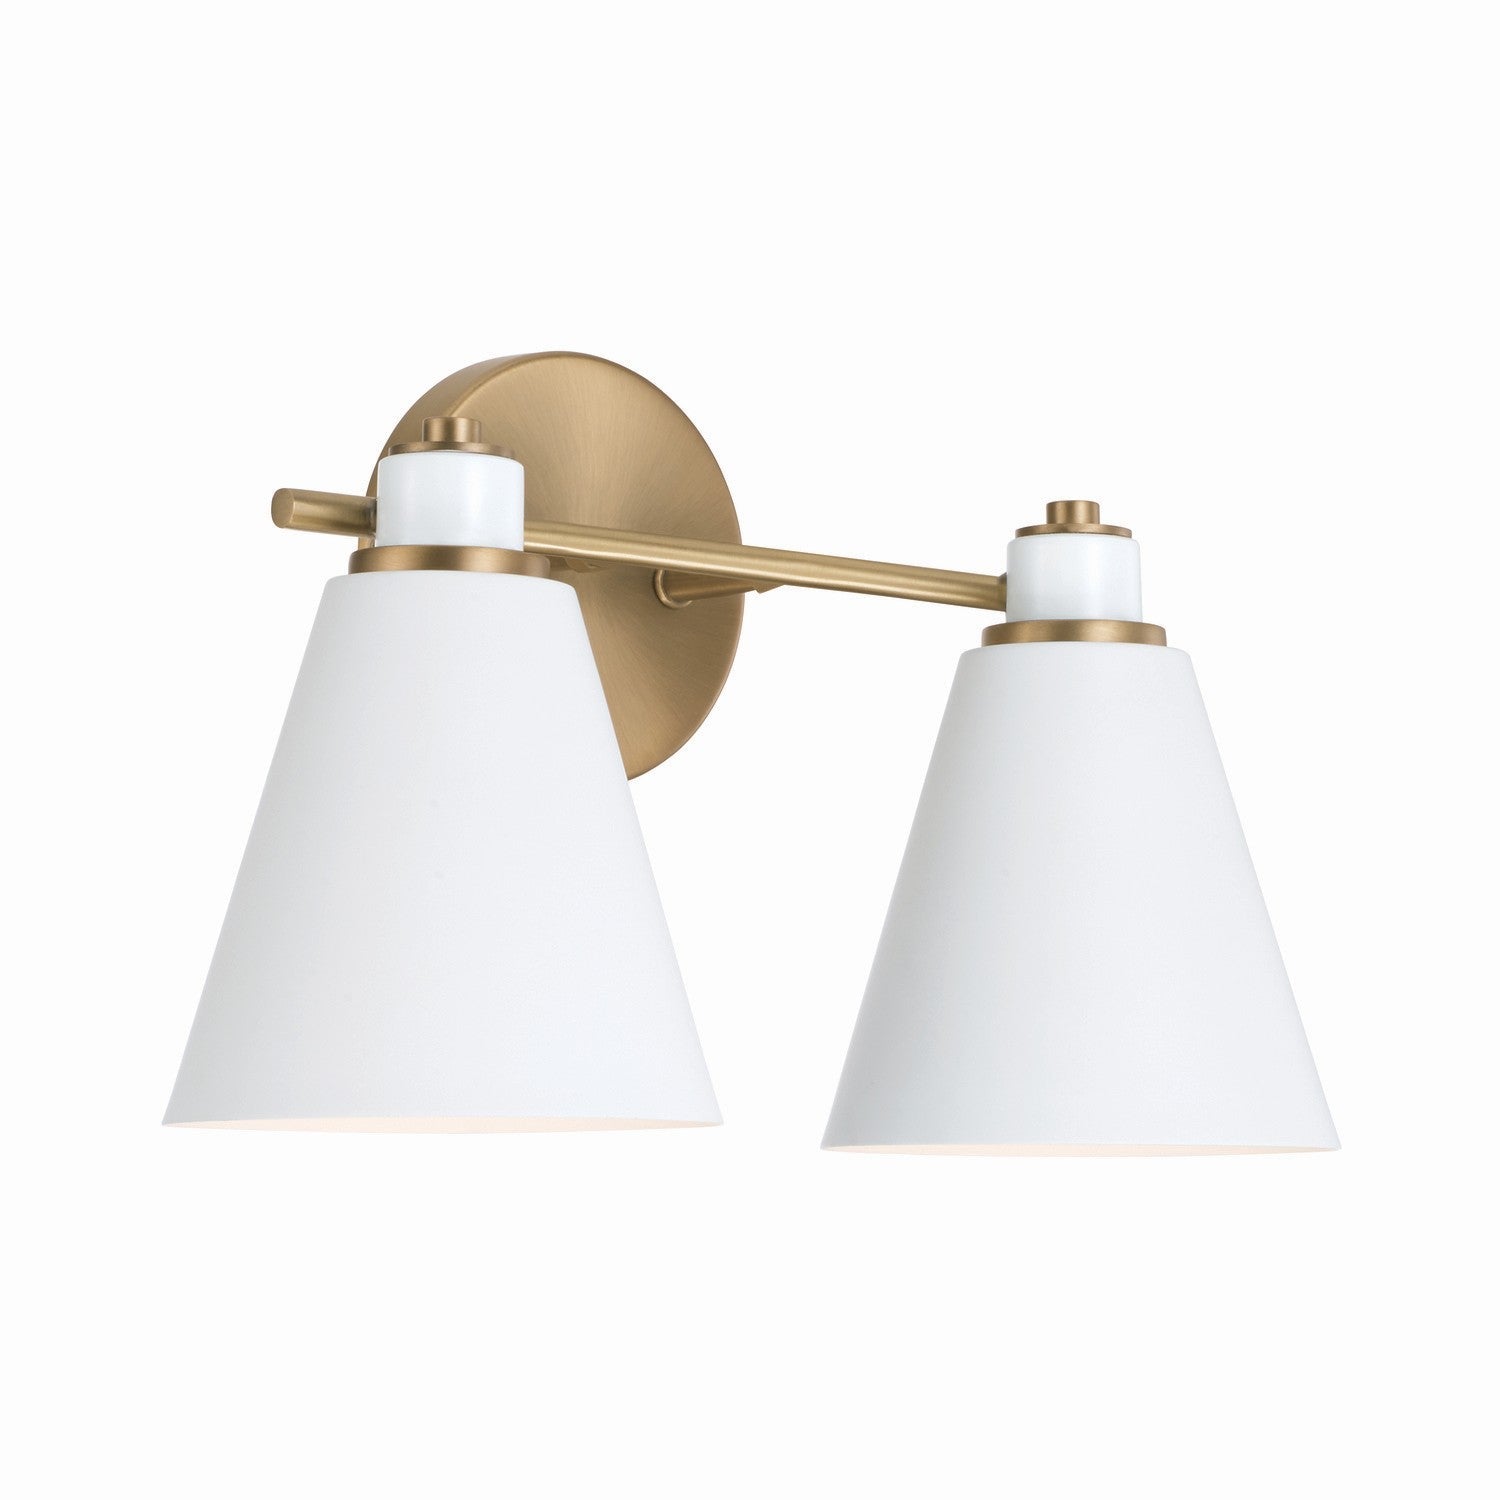 Capital Bradley 150121AW Bath Vanity Light 15 in. wide - Aged Brass and White